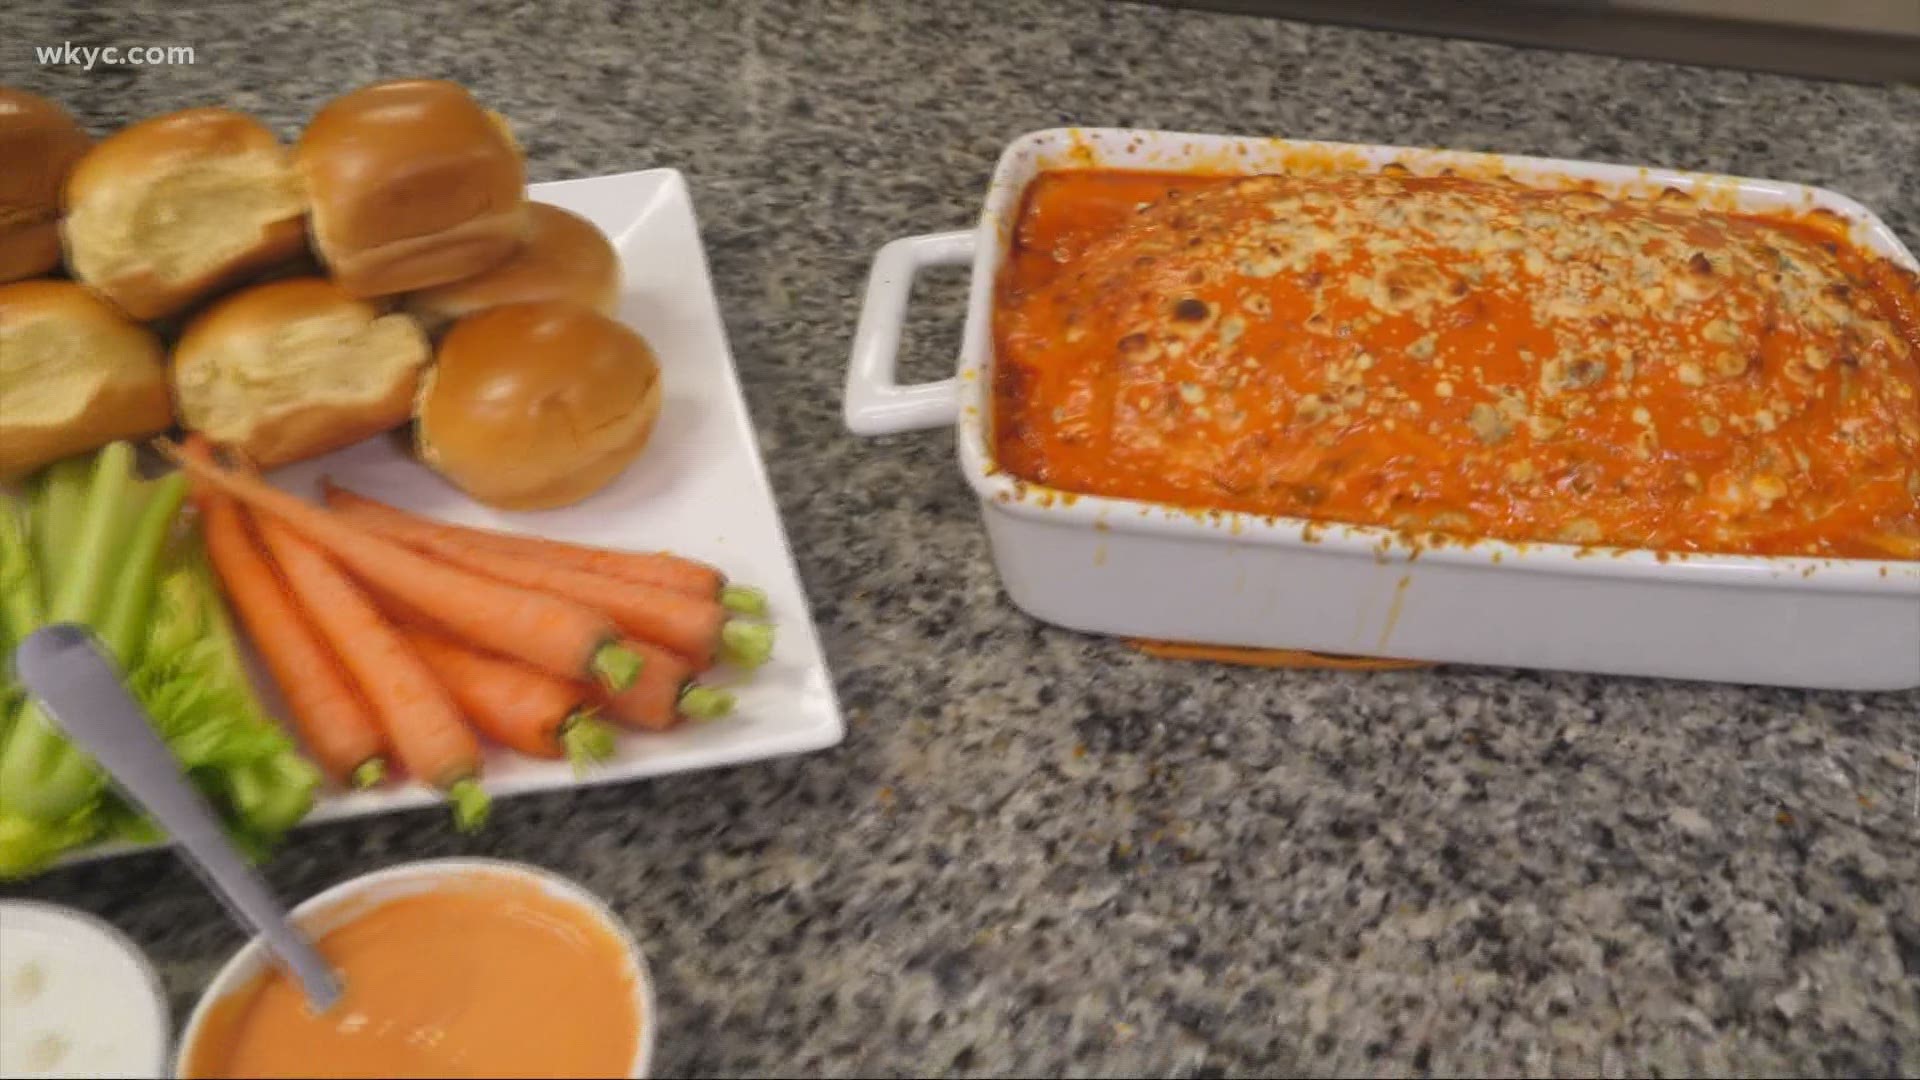 Feb. 5, 2021: Looking for something different to eat this Super Bowl Sunday? Here's a recipe for buffalo chicken meatloaf.